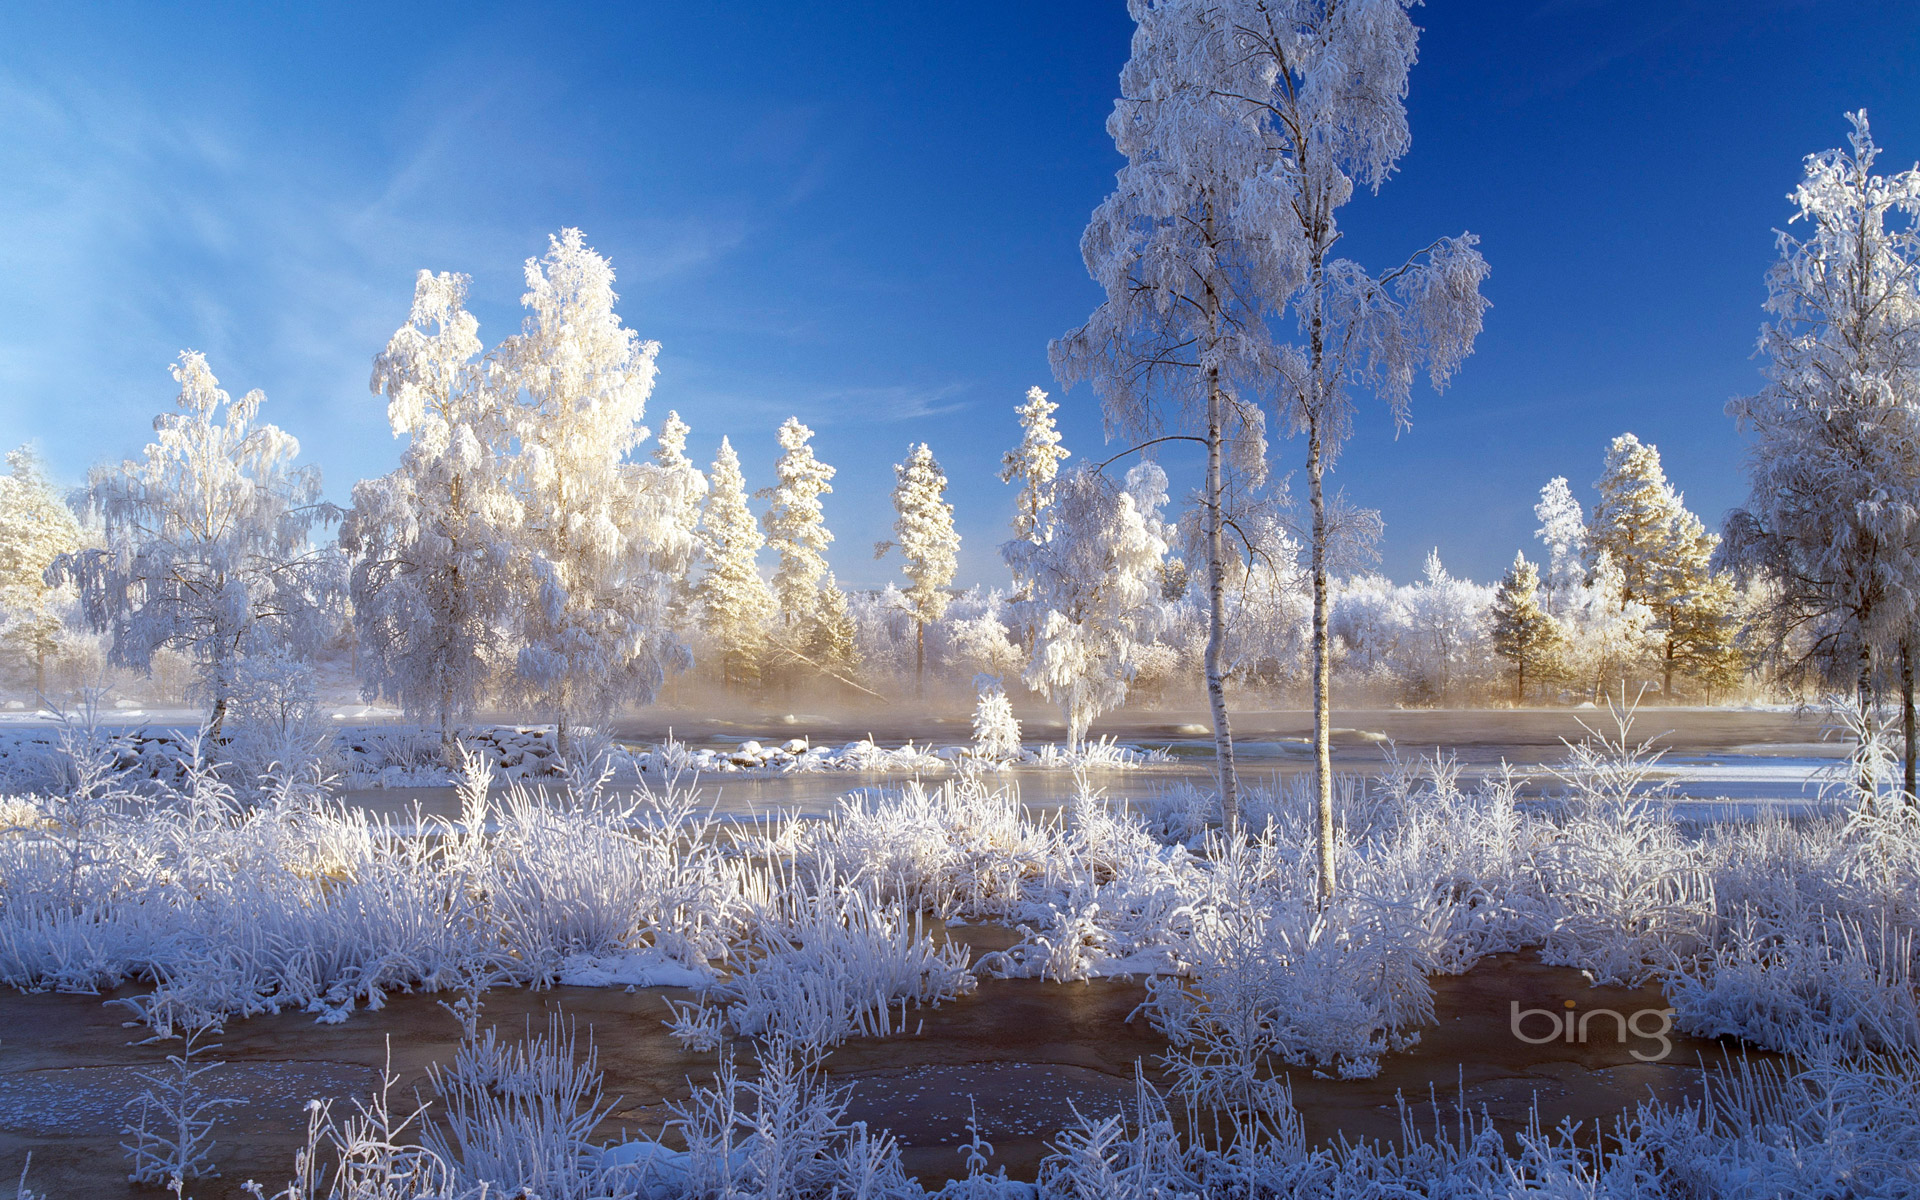 Trees and plants covered with snow in Dalarna, Sweden